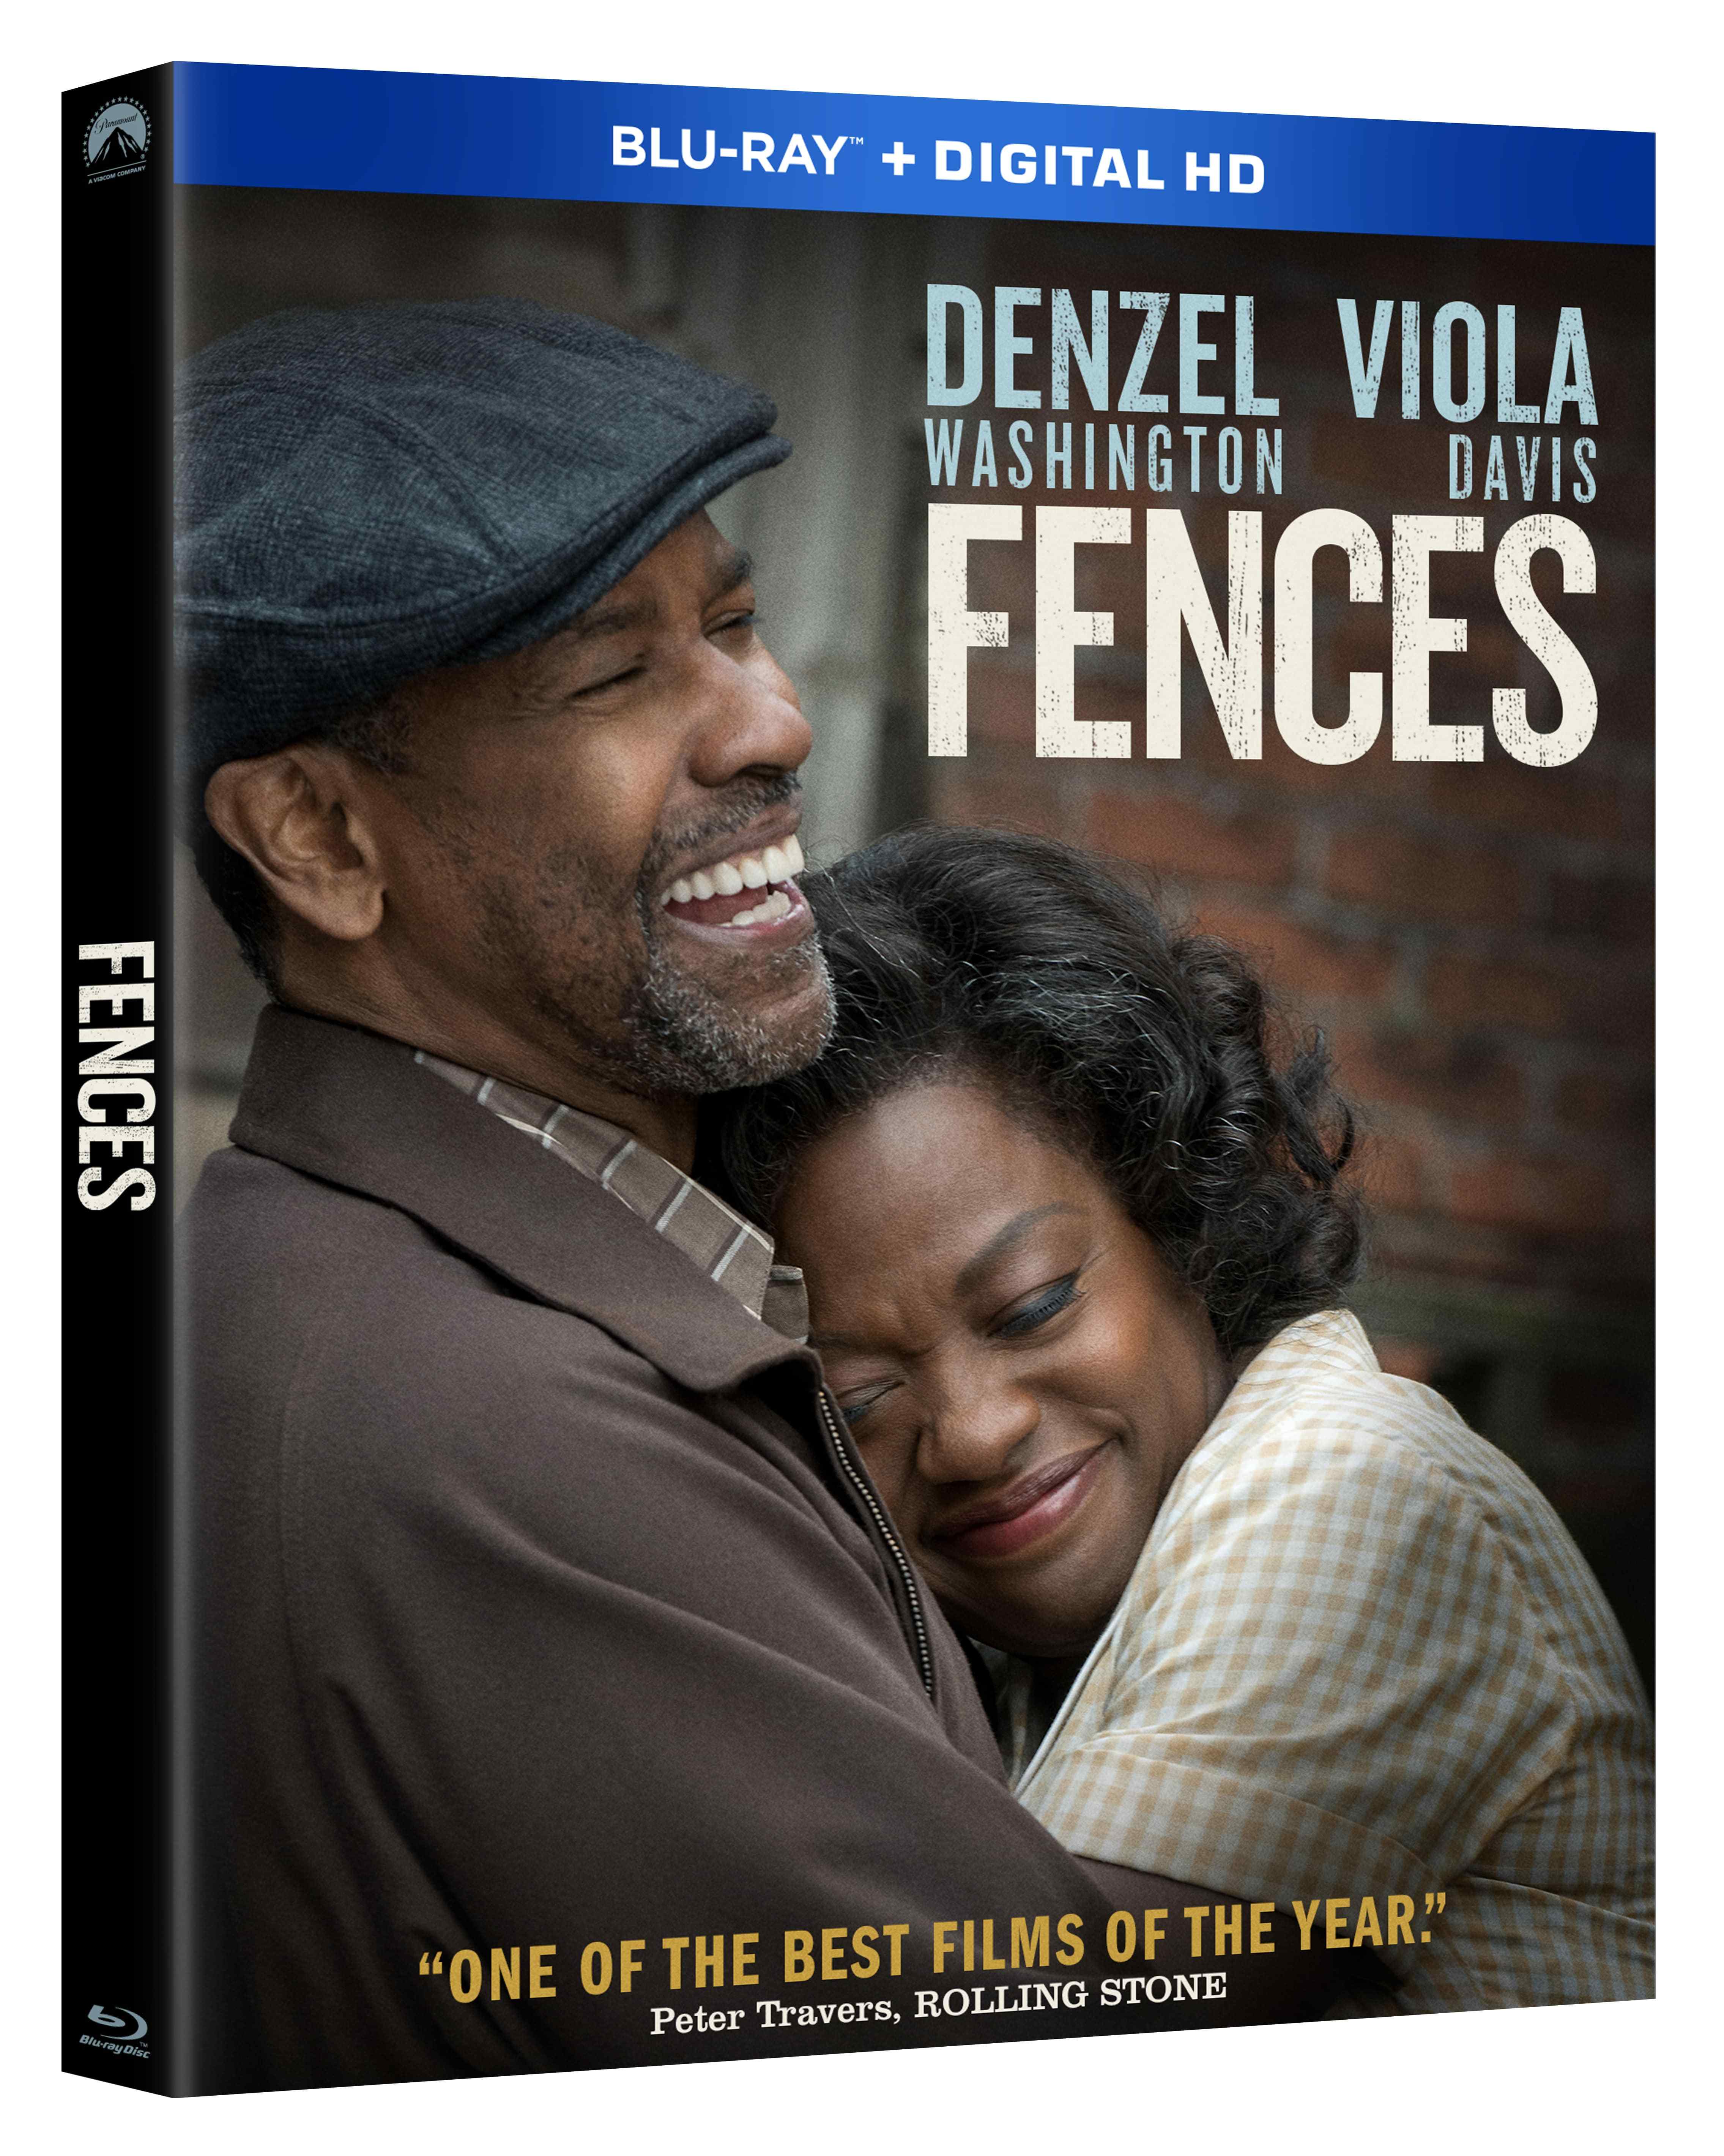 Denzel Washington and Viola Davis Star in the Oscar®-Nominated Masterpiece FENCES, Arriving on Blu-ray™ Combo Pack March 14, 2017 Business Wire